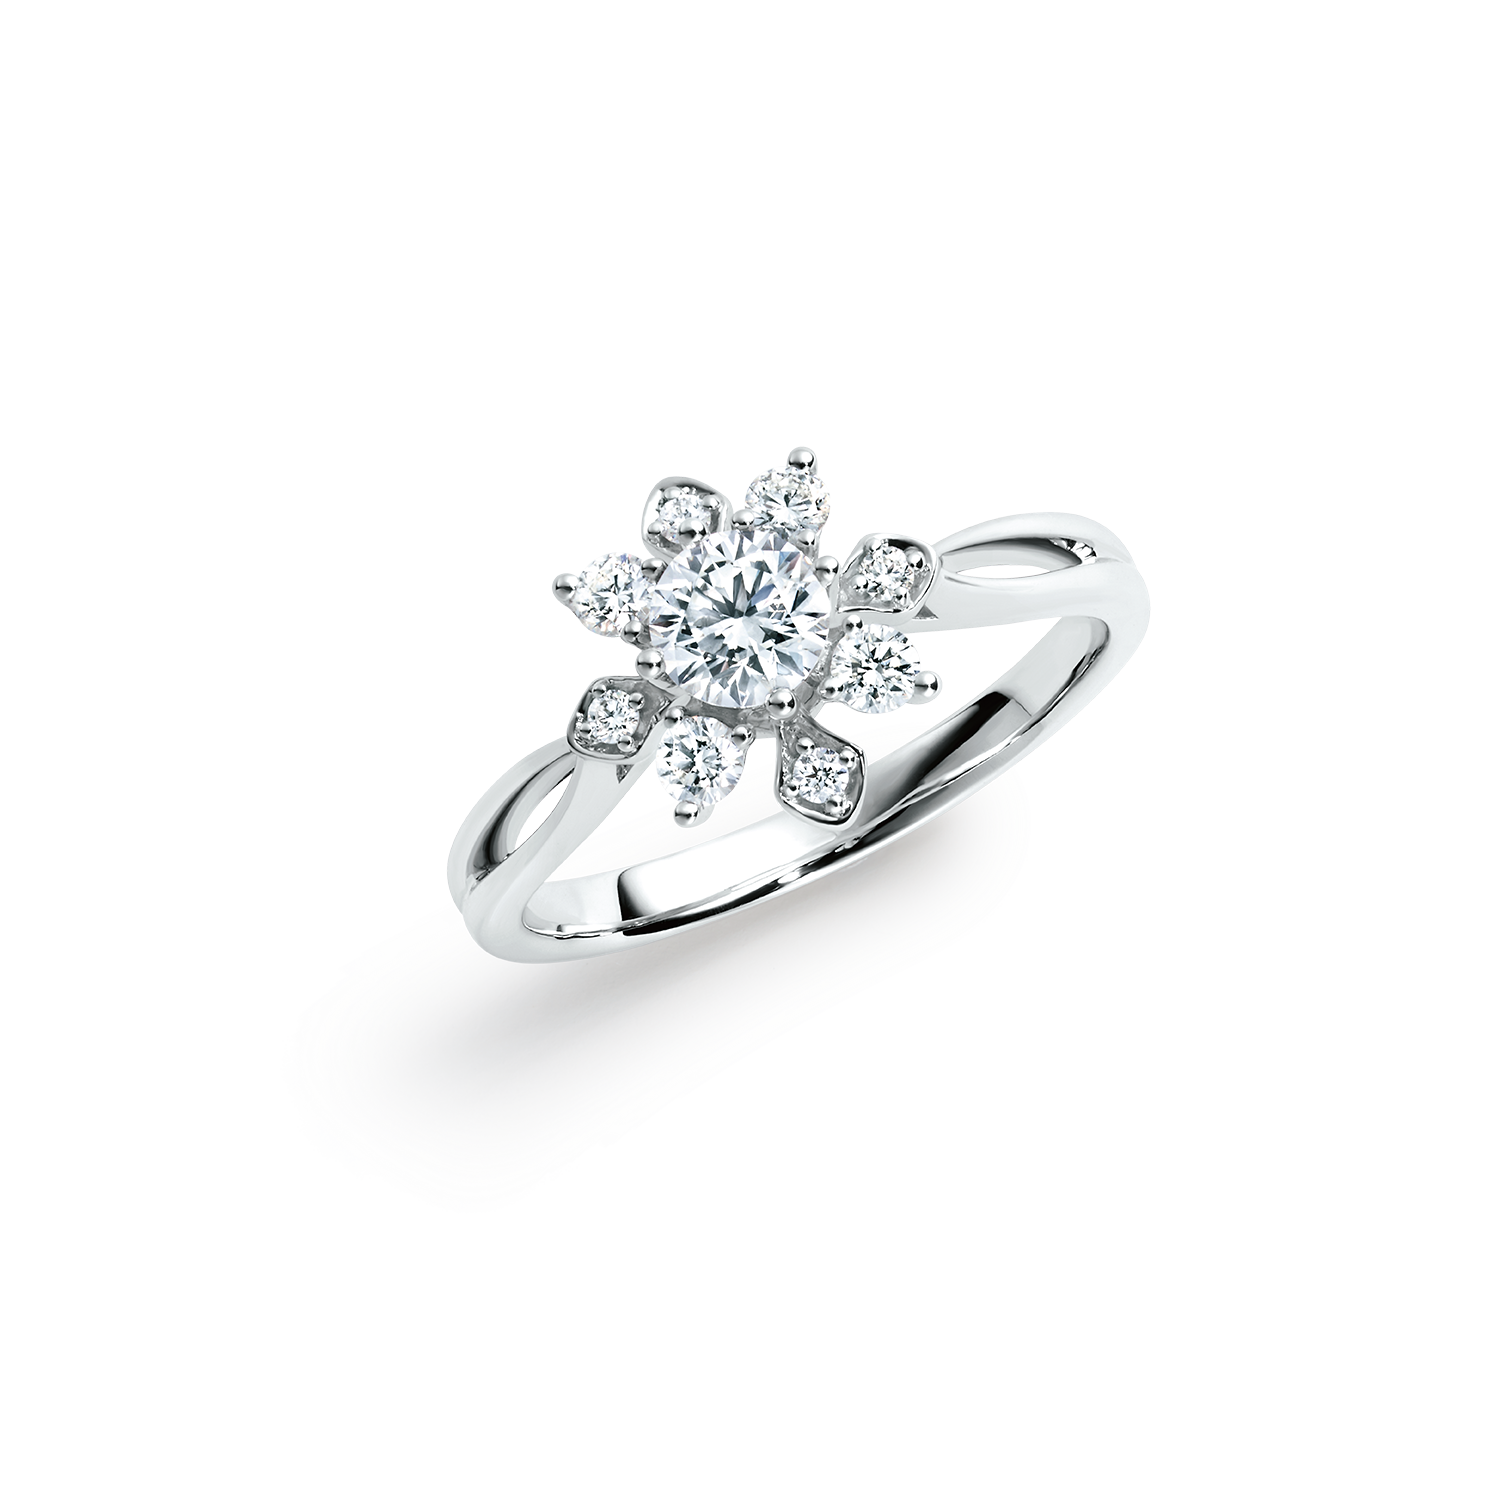 Wedding Collection "Enchanted Blossom" 18K Gold Diamond Ring